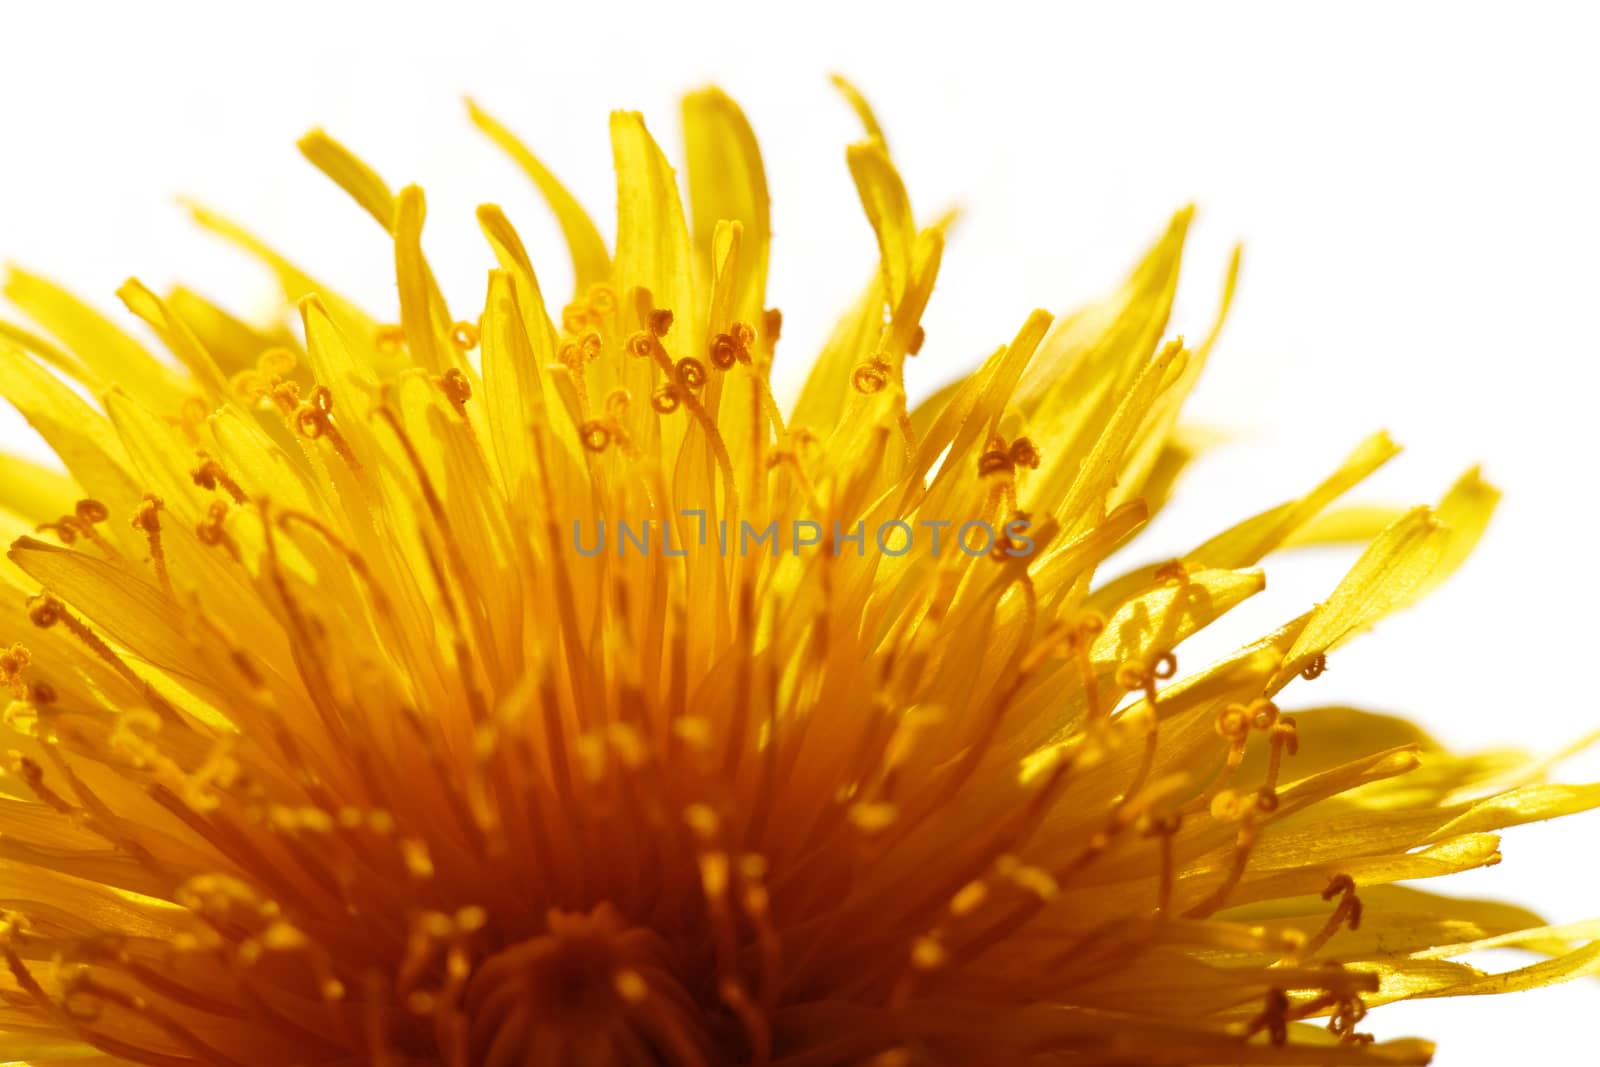 yellow dandelion flower close-up on white background